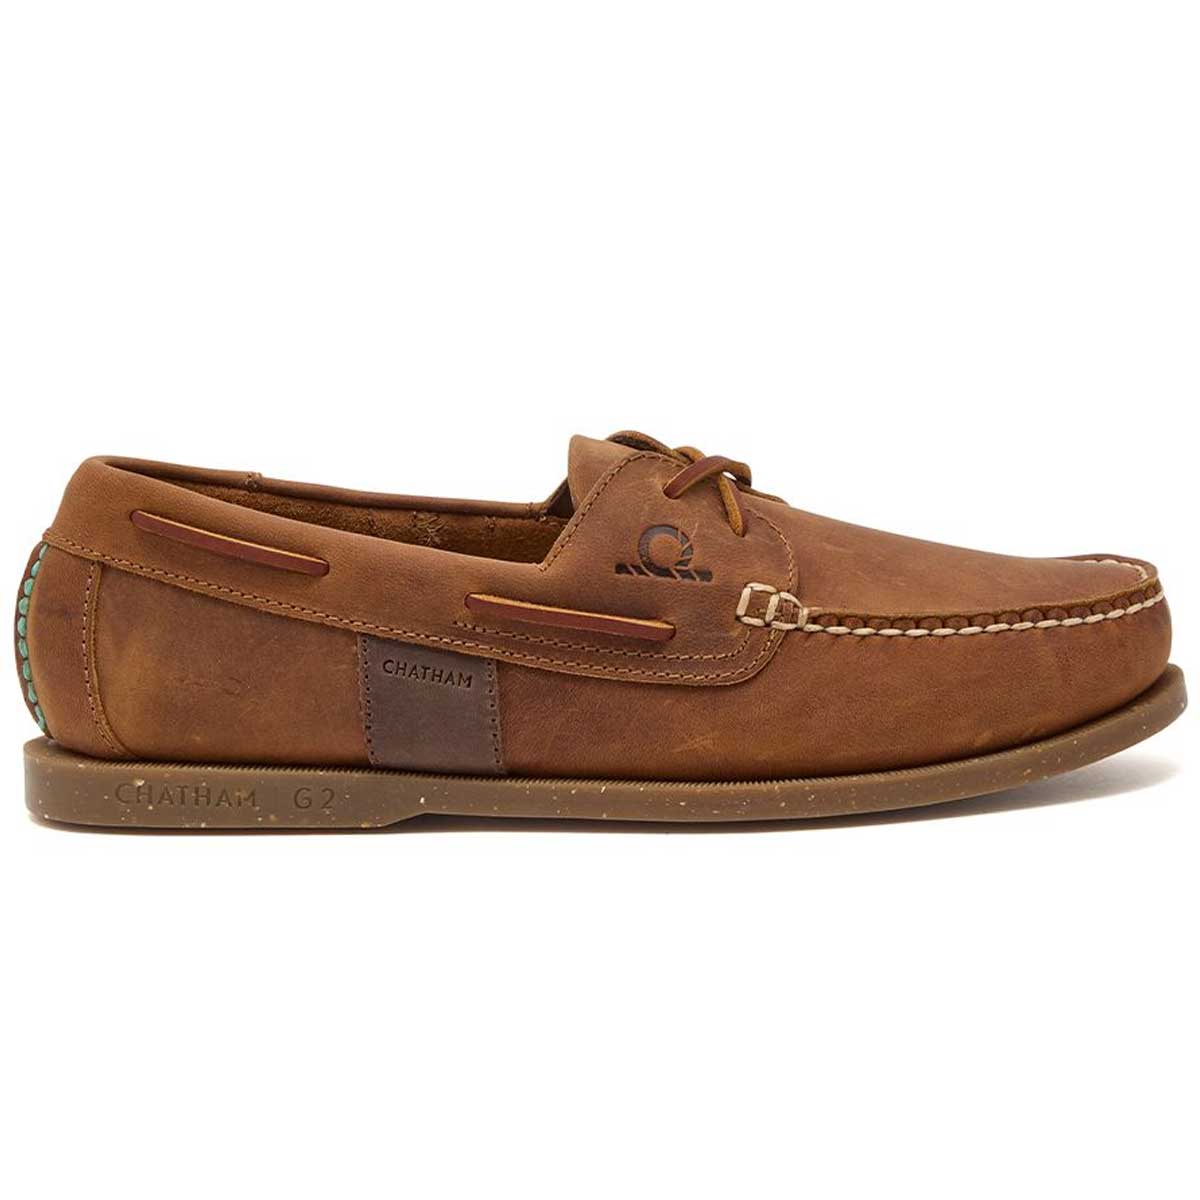 CHATHAM Java II G2 Leather Sustainable Deck Shoes - Men's - Walnut